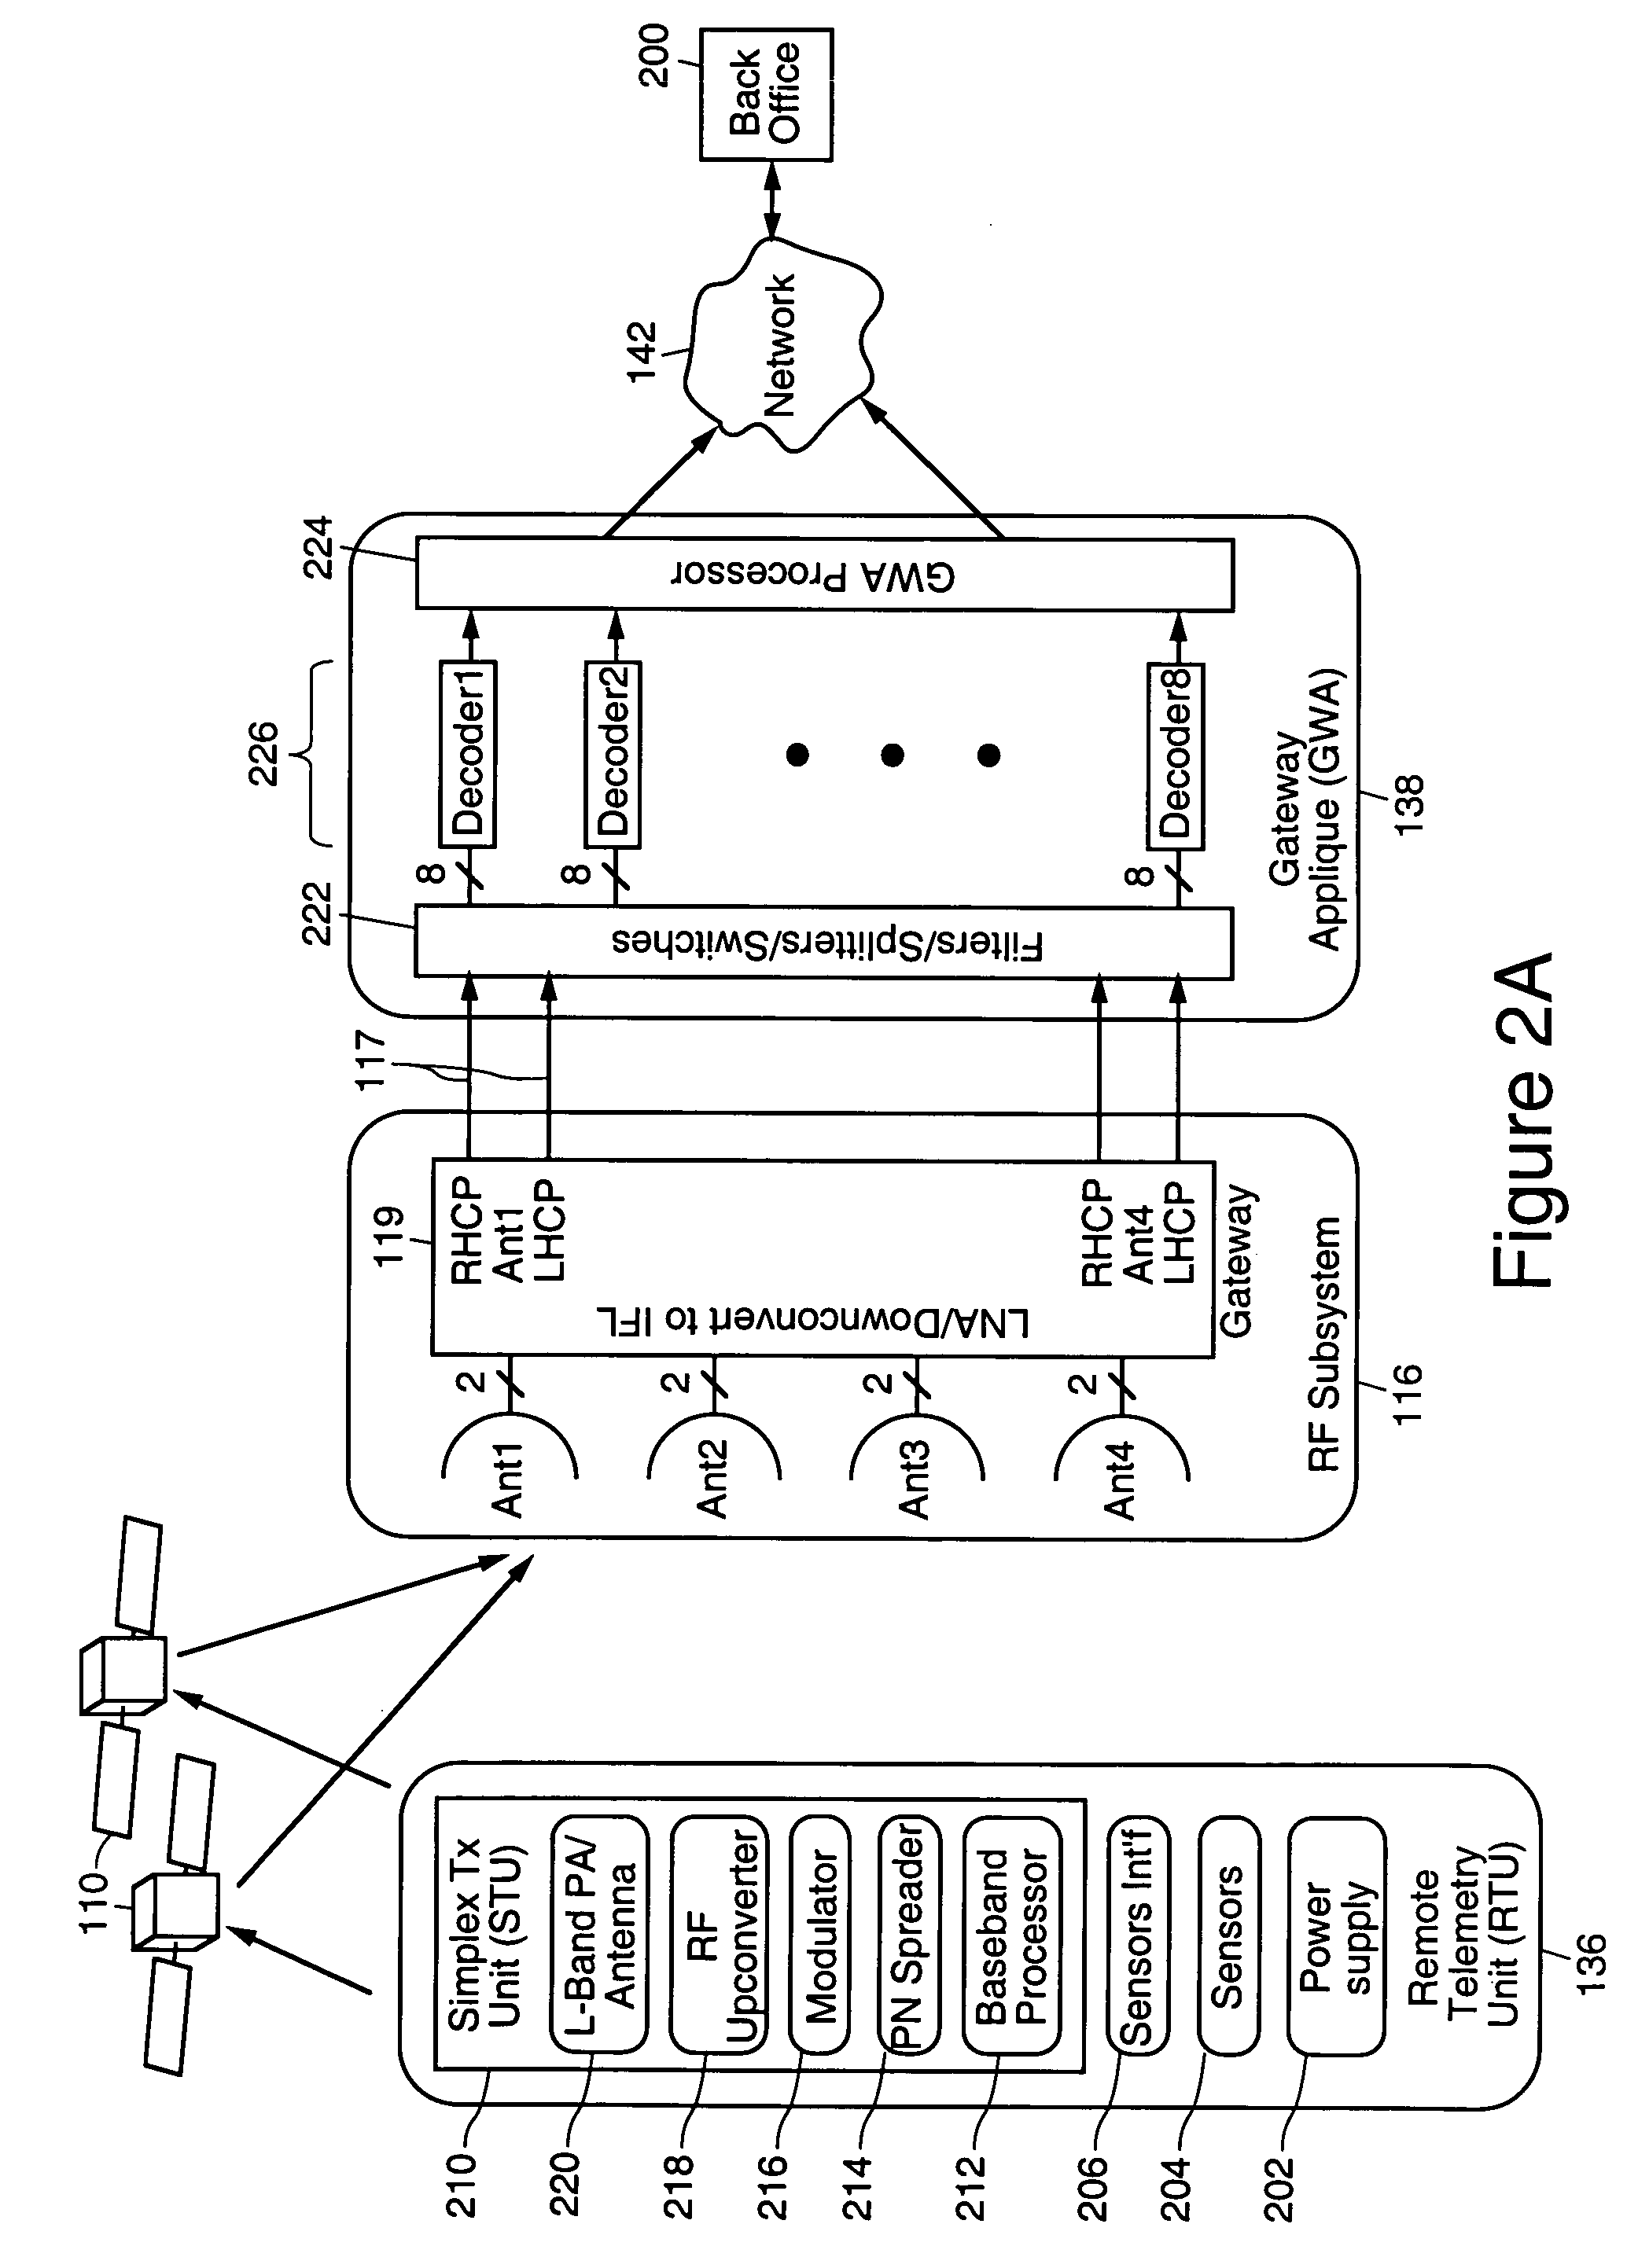 Method and system for routing telemetry in a simplex mode